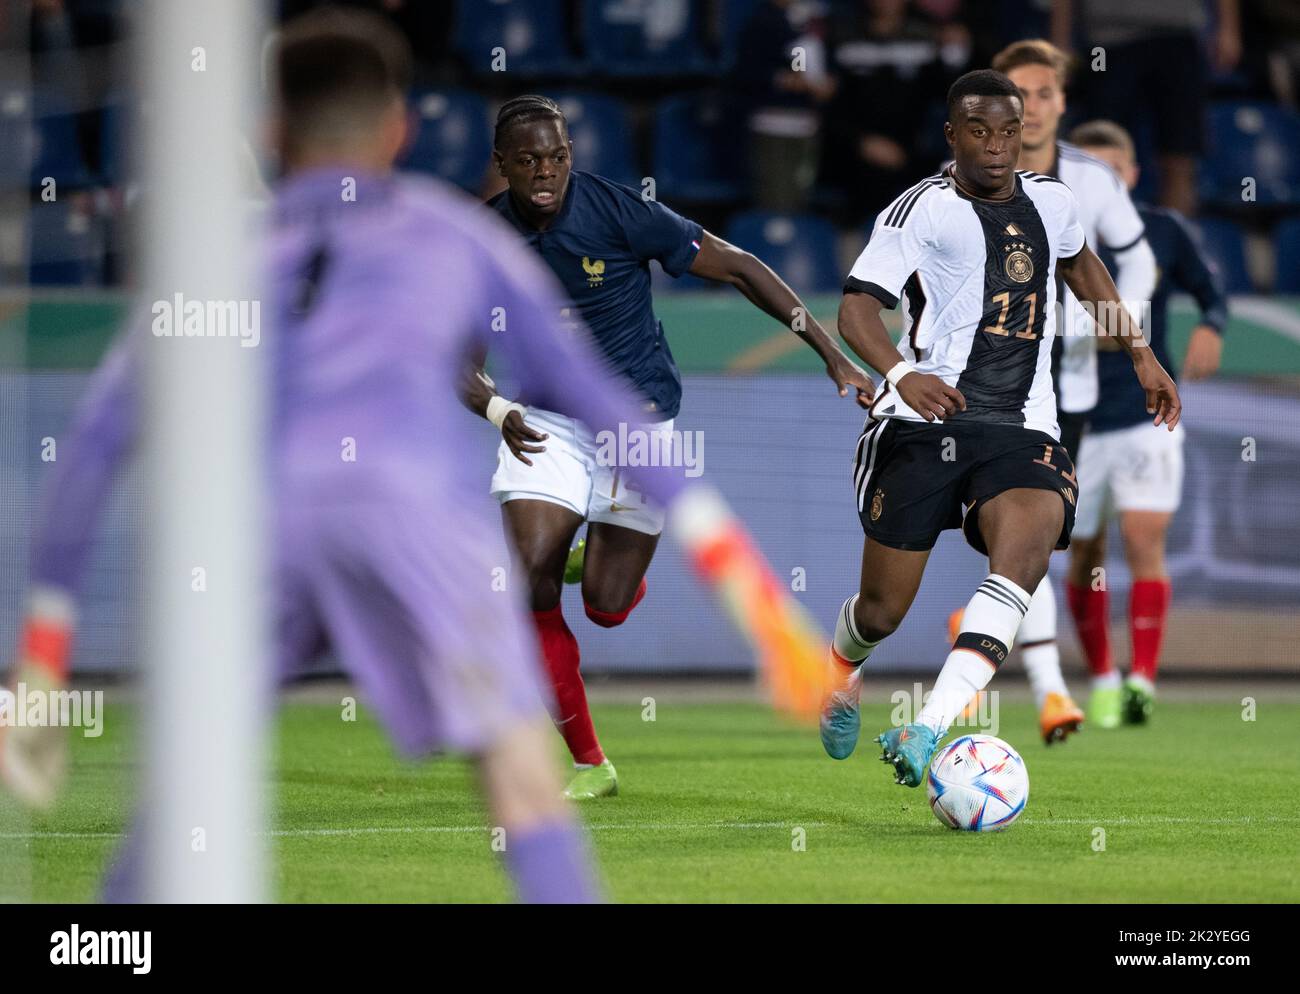 Magdeburg, Germany. 23rd Sep, 2022. Soccer, U21 Men: International Matches, Germany - France, MDCC-Arena. Germany's Youssoufa Moukoko (from right) and France's Castello Lukeba fight for the ball. Credit: Hendrik Schmidt/dpa/Alamy Live News Stock Photo